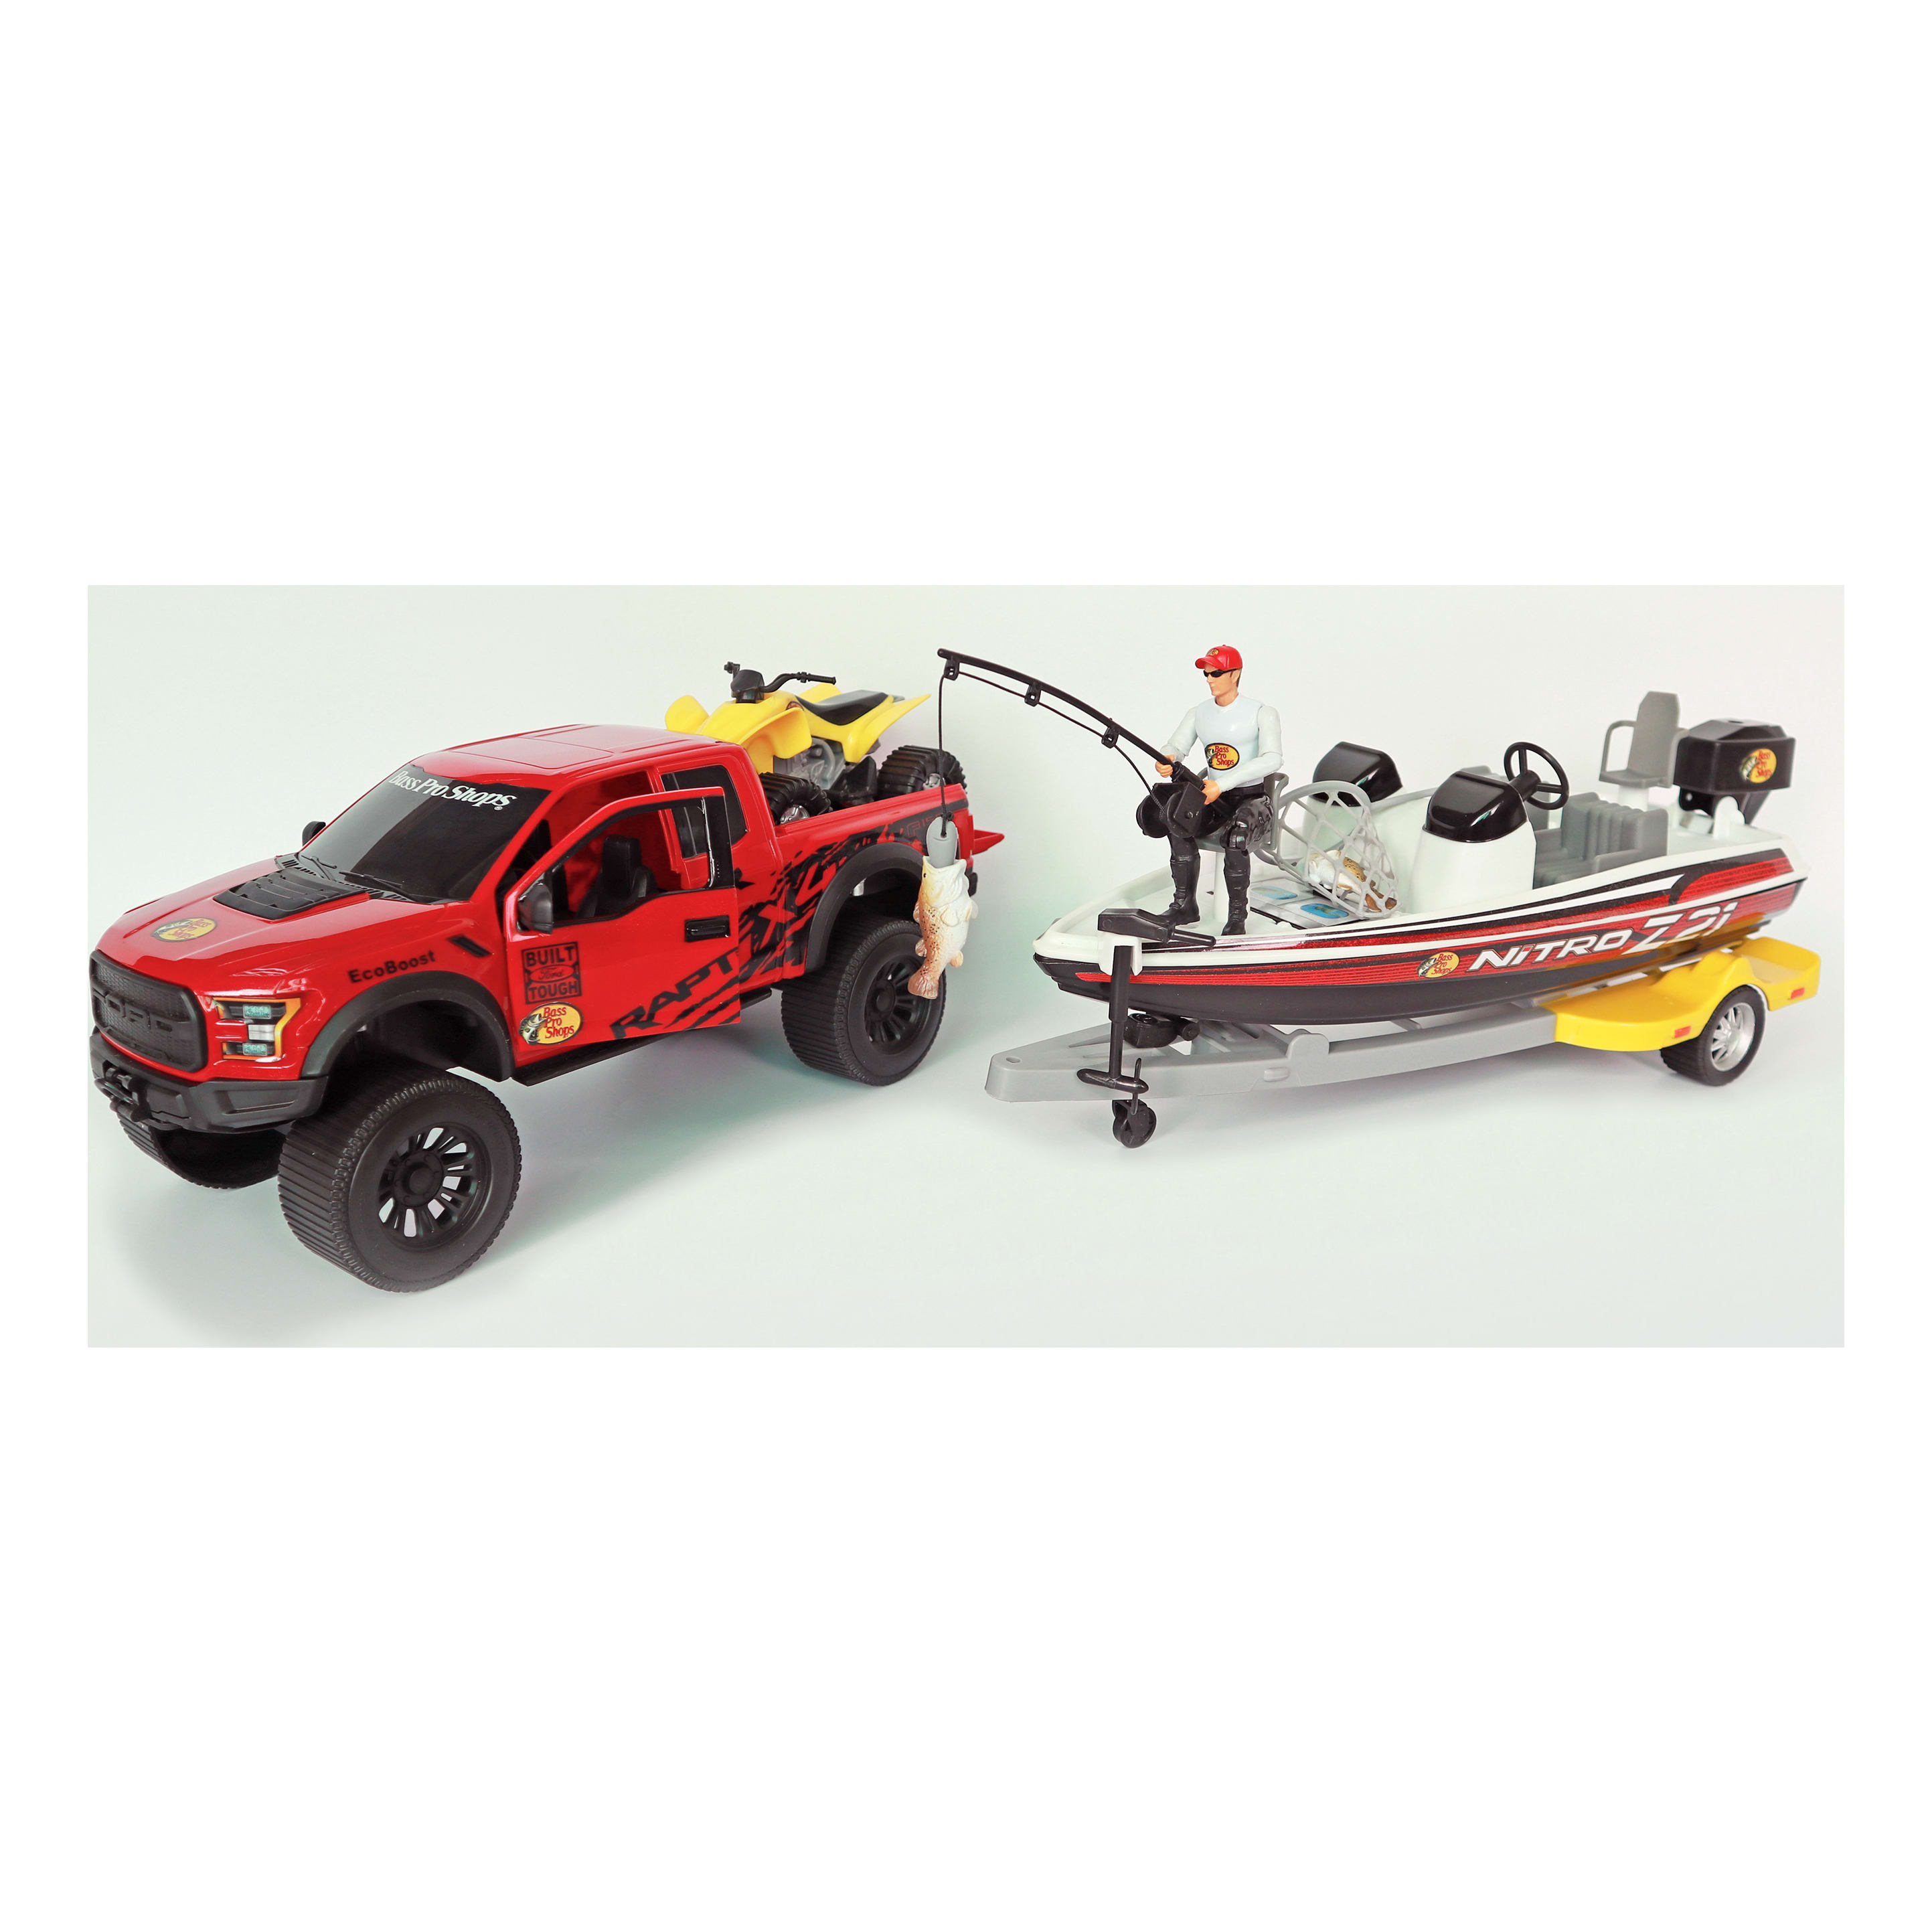 Bass Pro Shops® J-Bass Boat and Ford® Raptor Playset